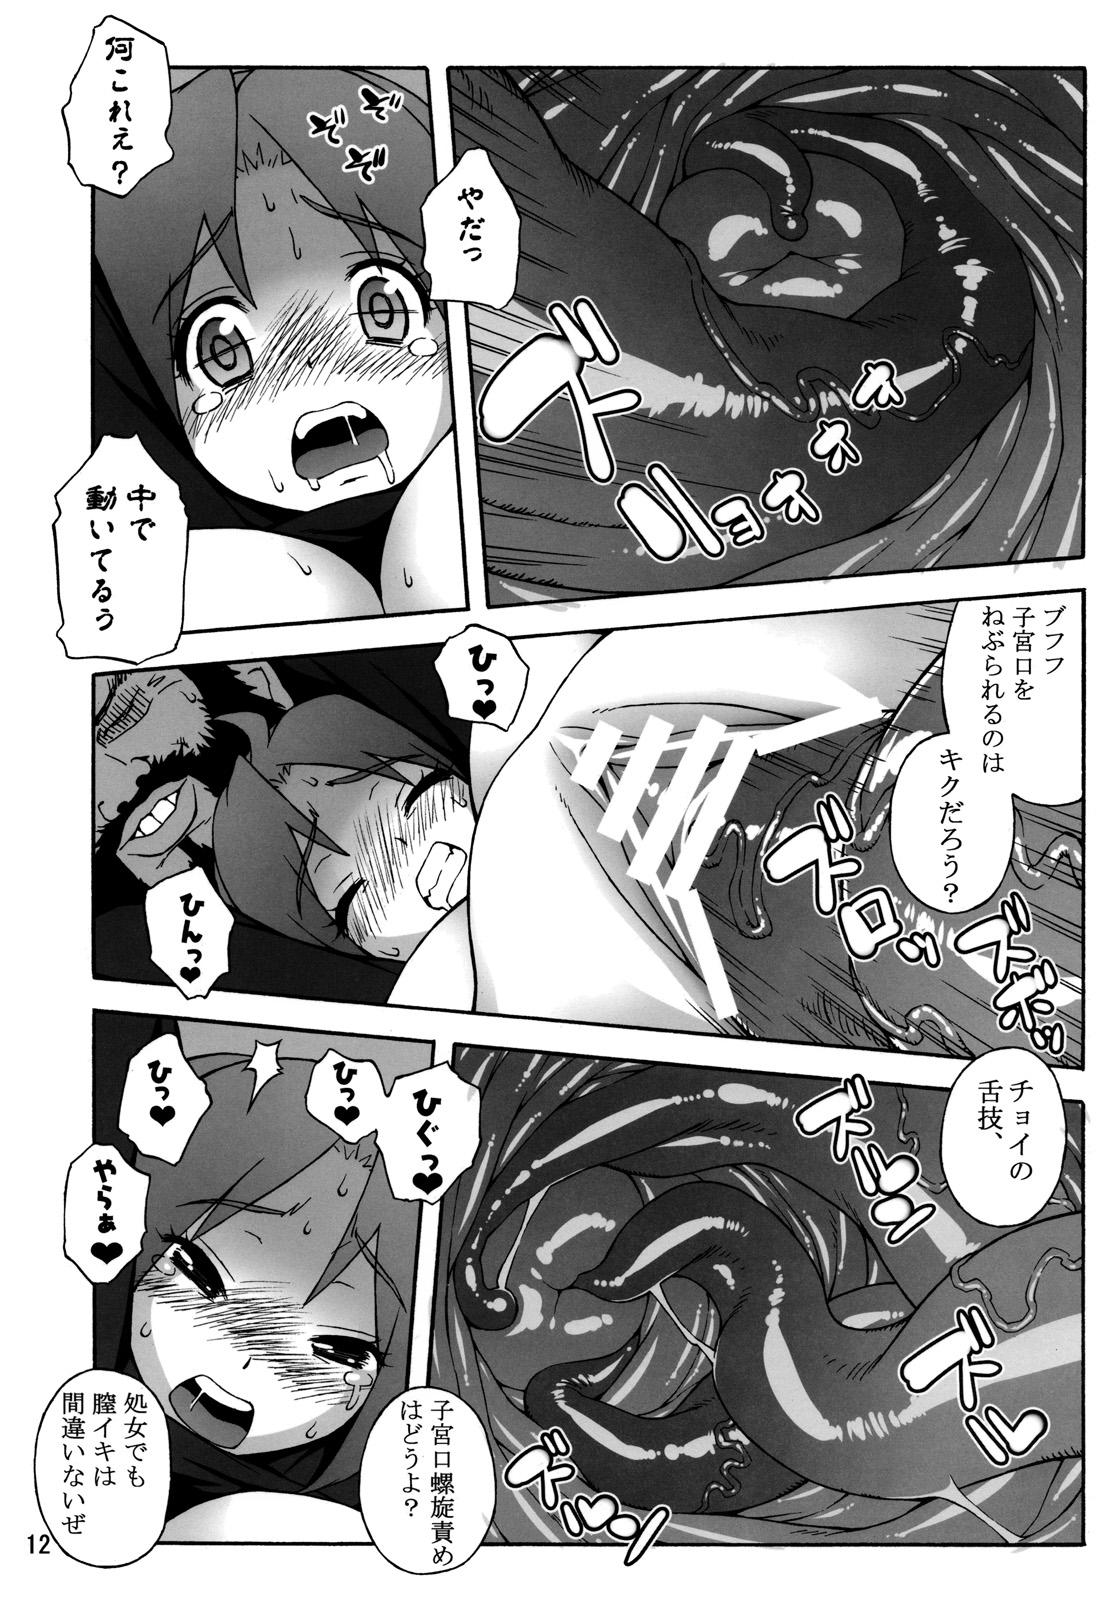 Mexicana A.N.T.R. - King of fighters Romance - Page 11